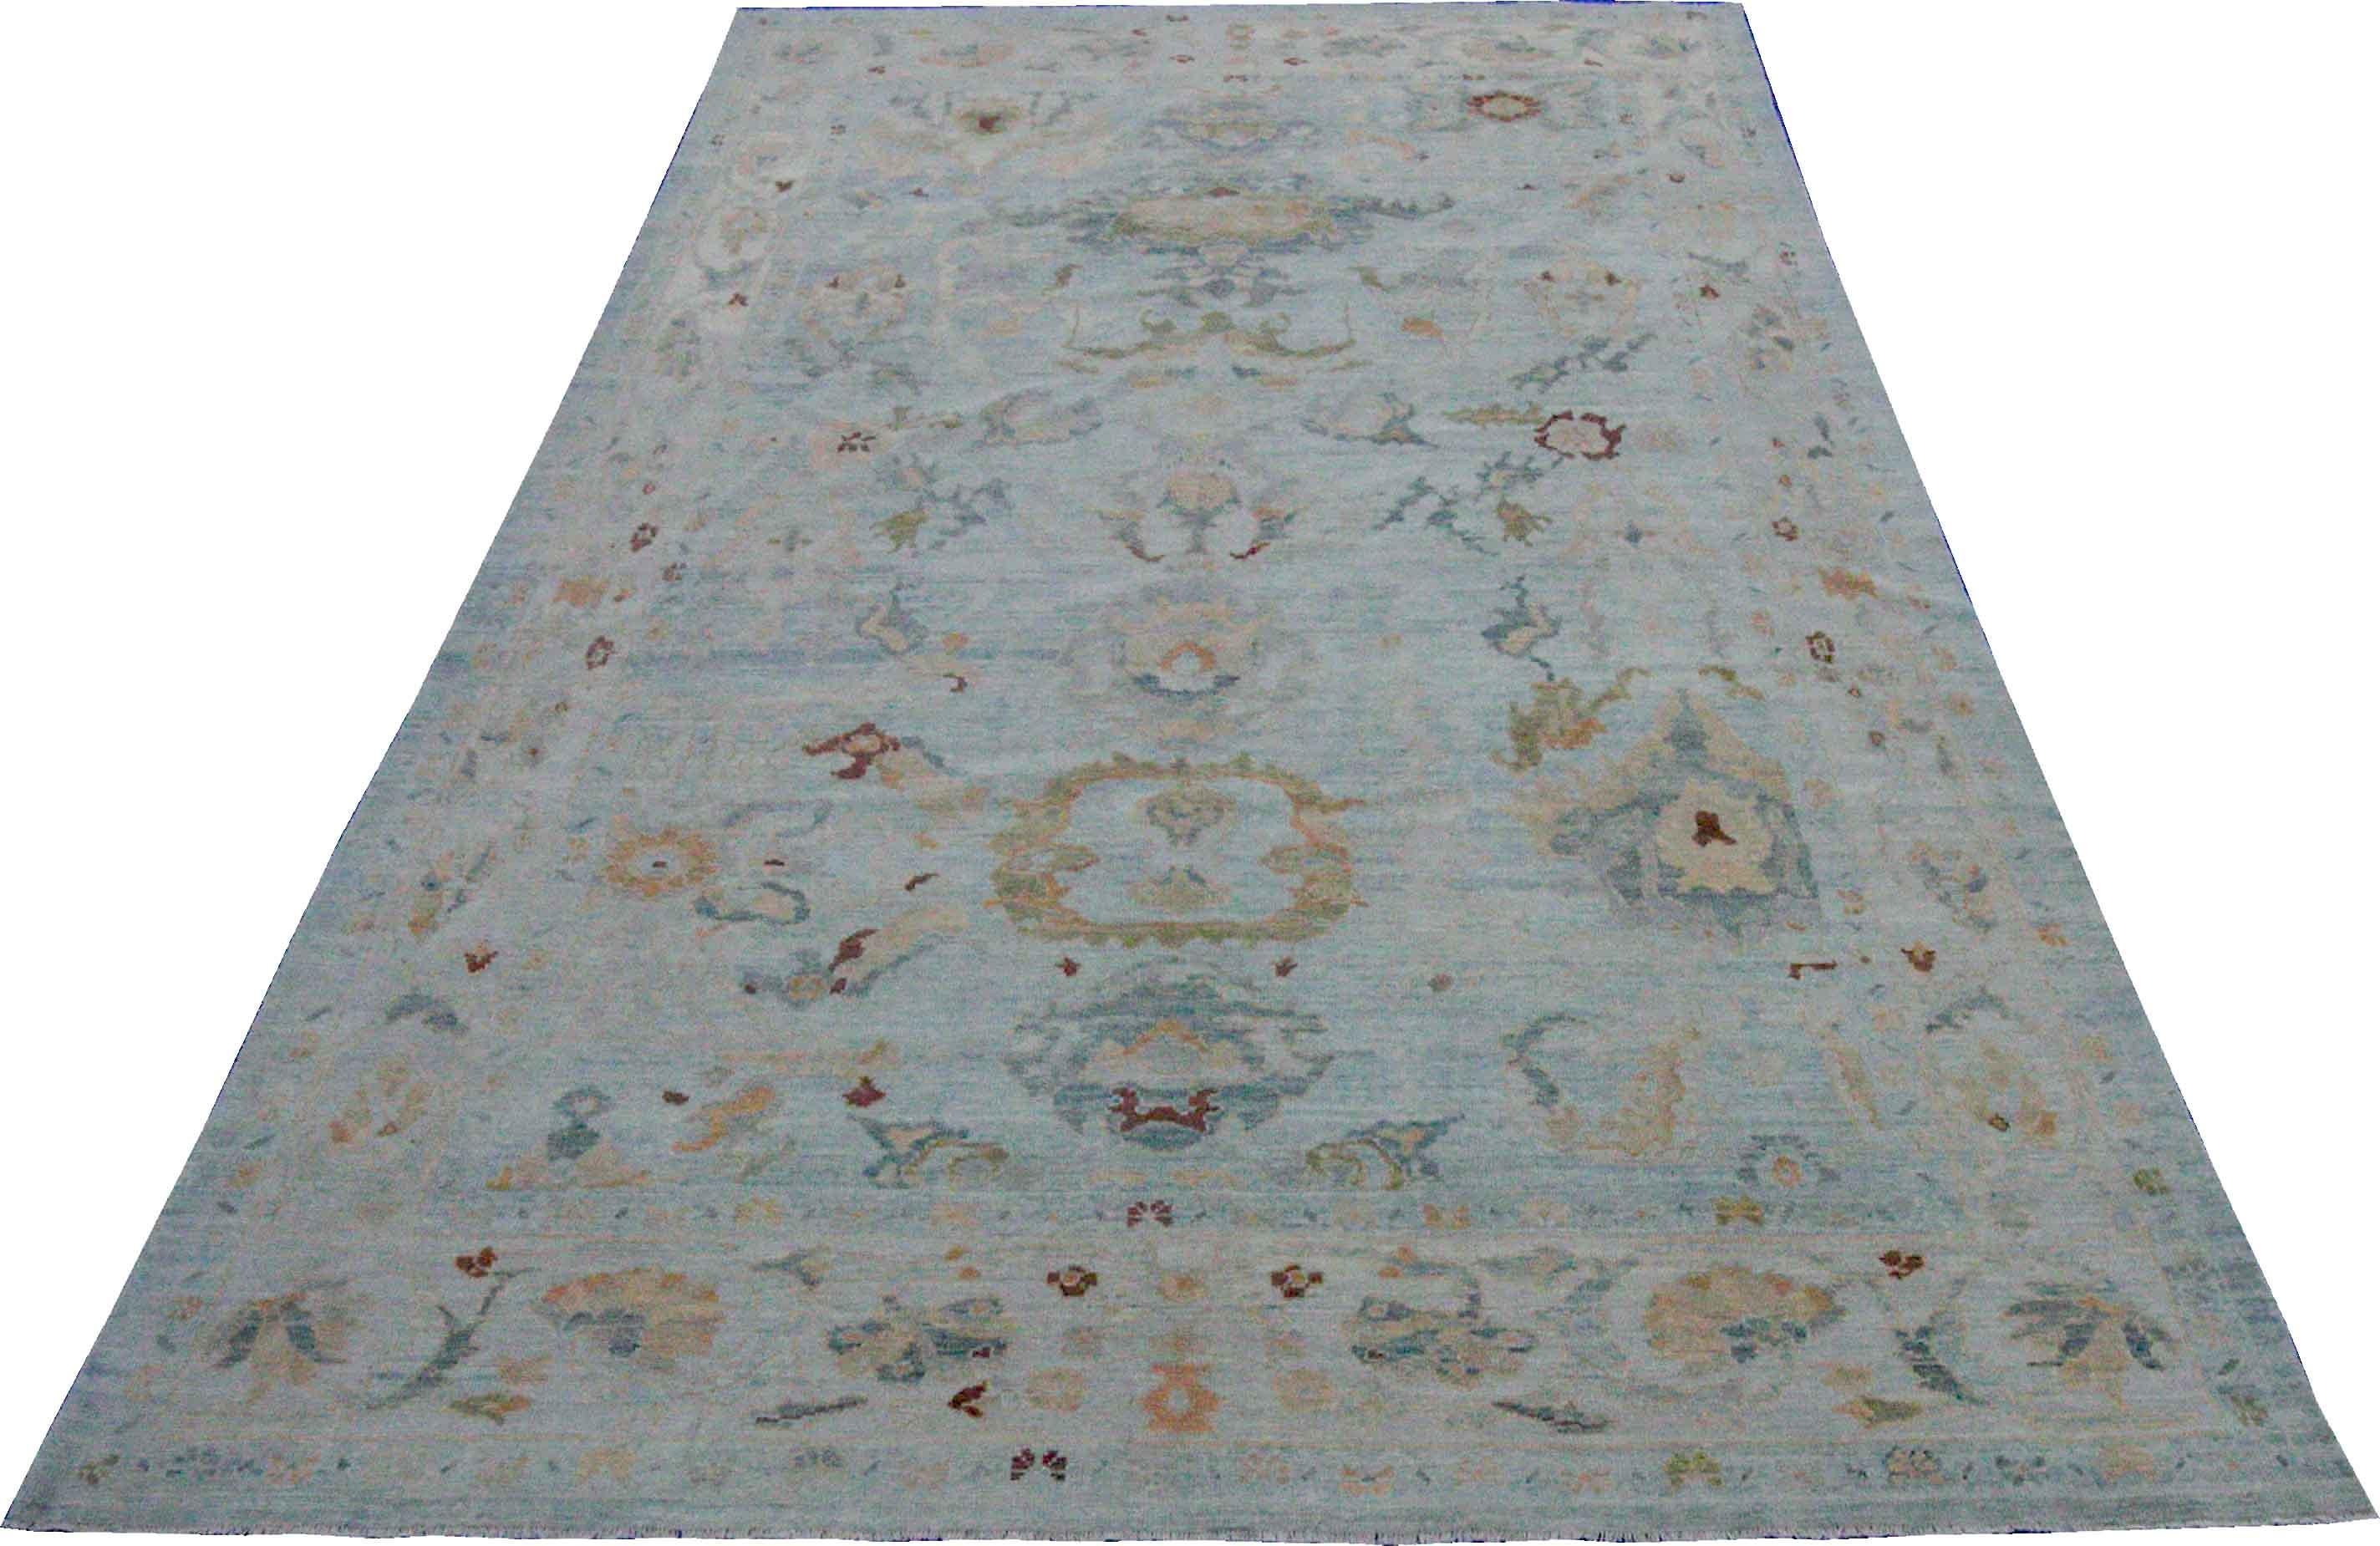 New Turkish rug made of handwoven sheep’s wool of the finest quality. It’s colored with organic vegetable dyes that are certified safe for humans and pets alike. It features floral details in green and beige over a blue field. Flower patterns are